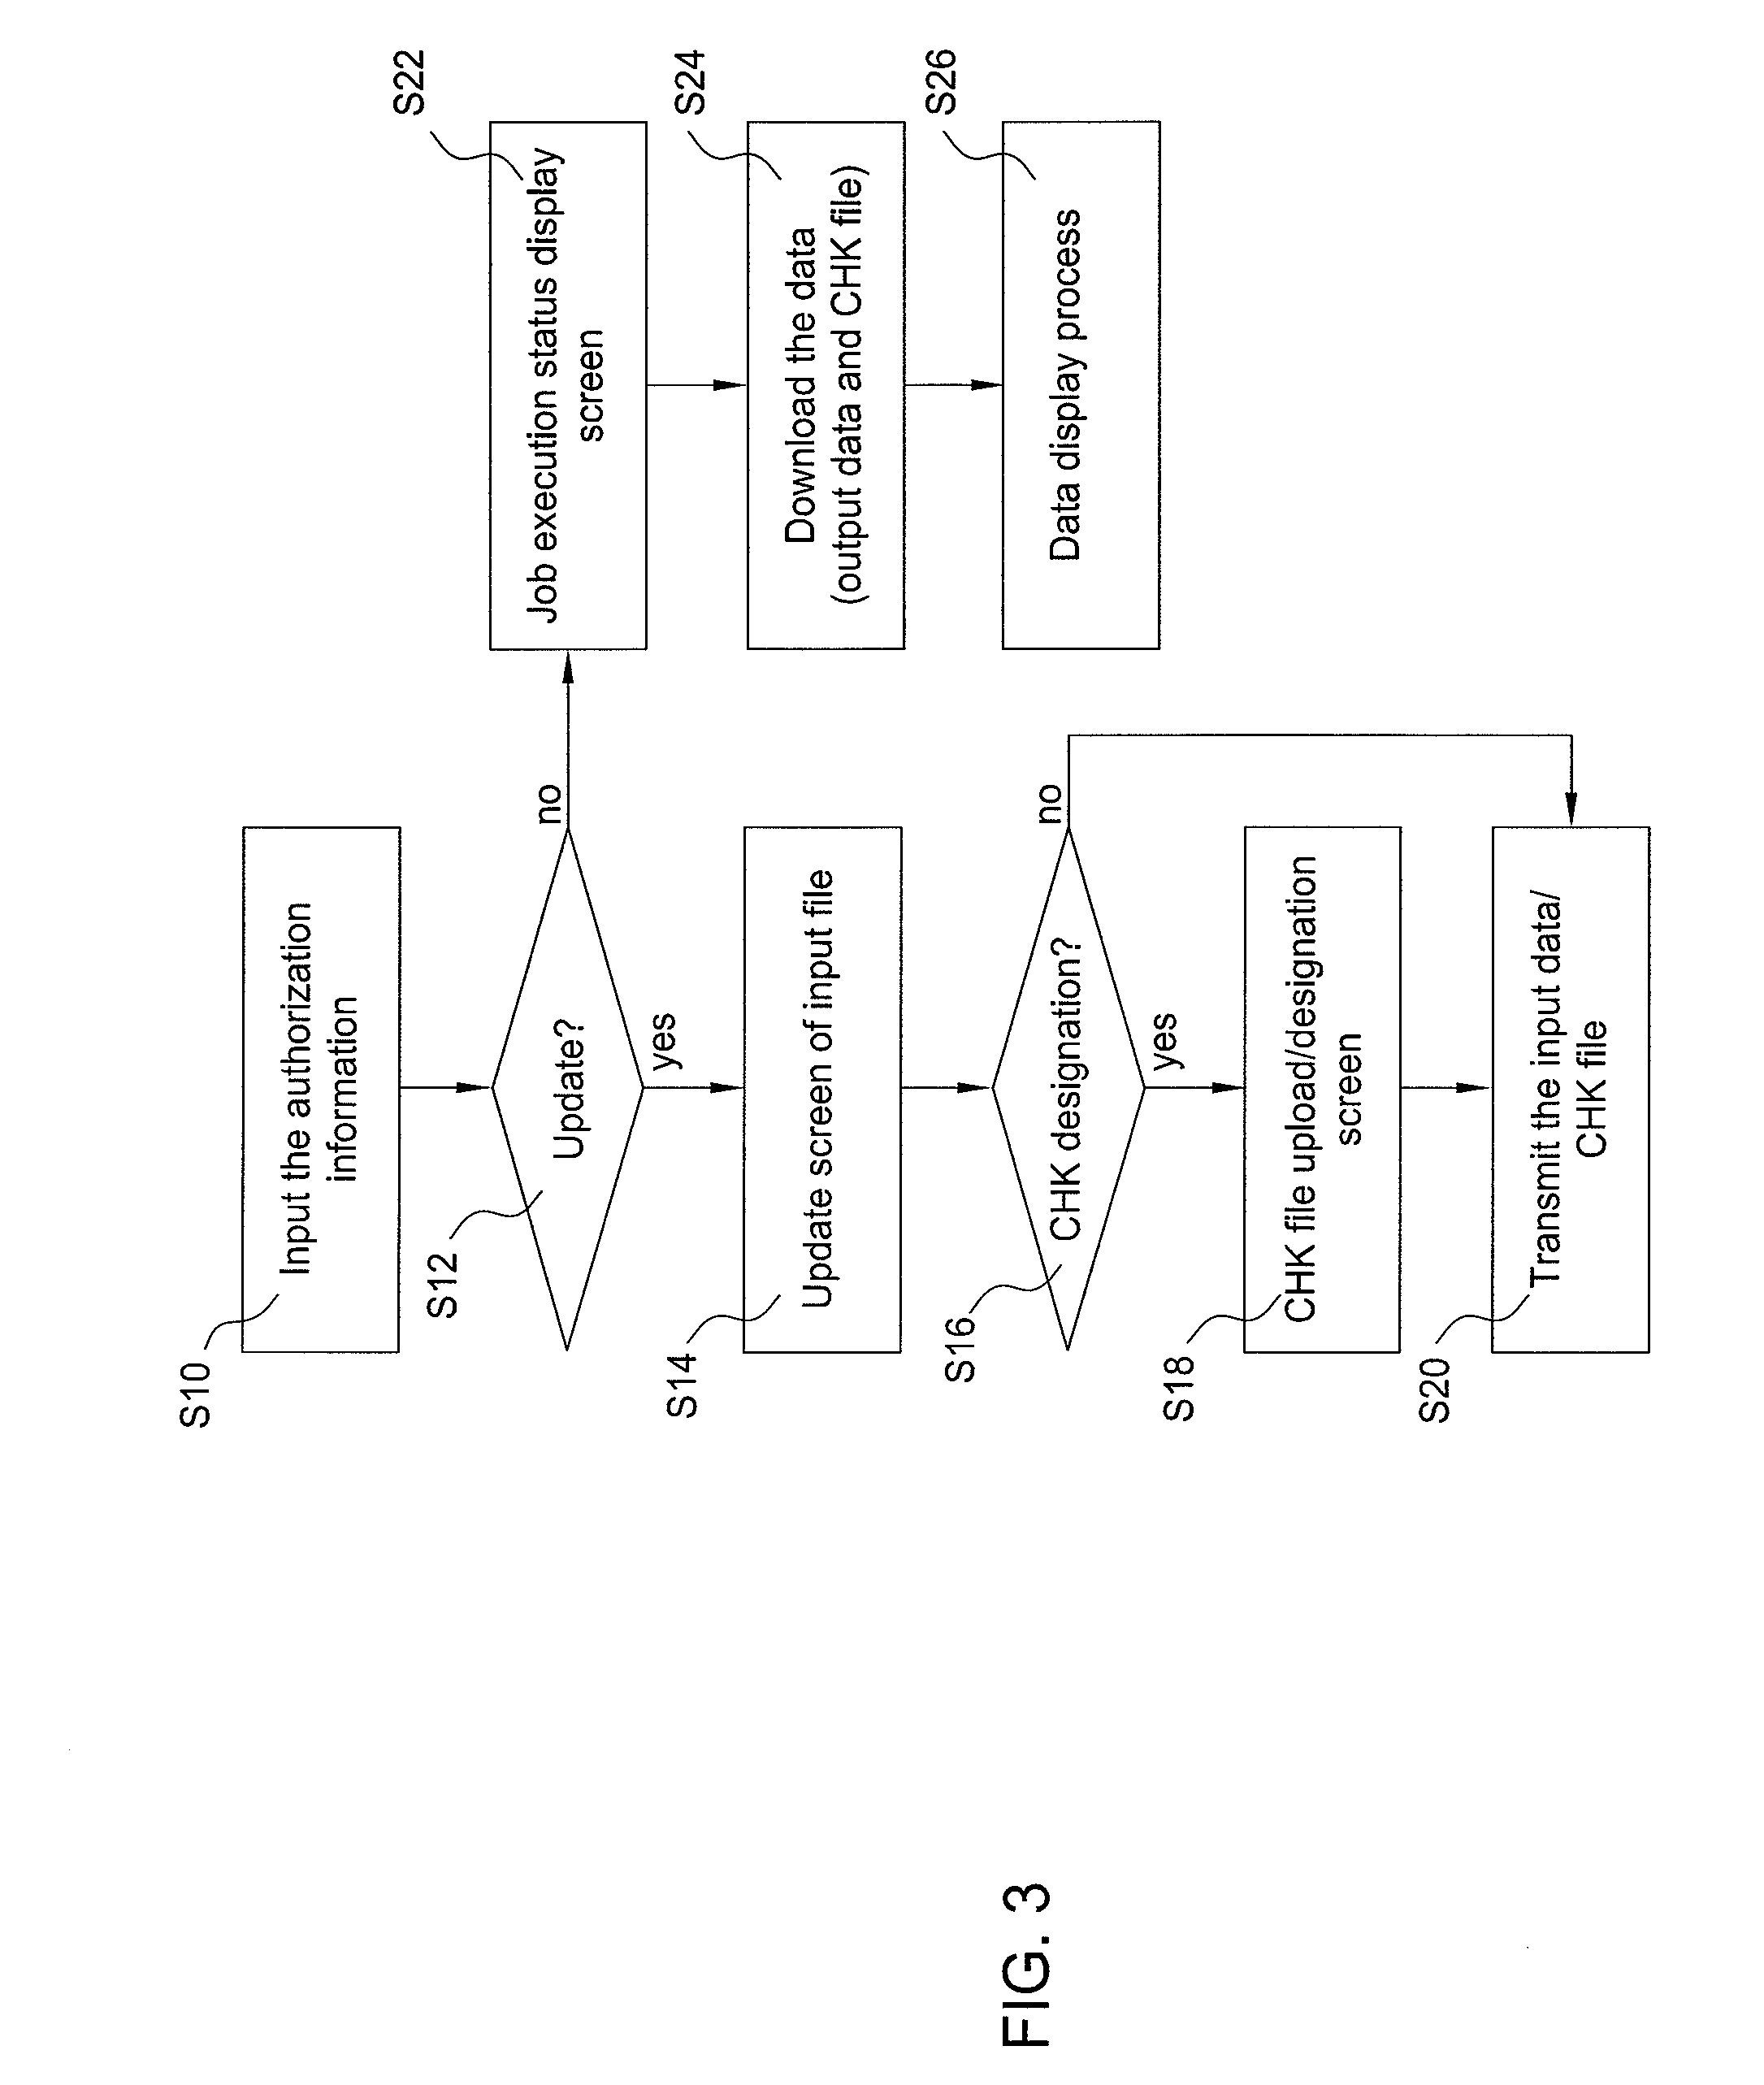 Method and apparatus for storing and processing molecular information